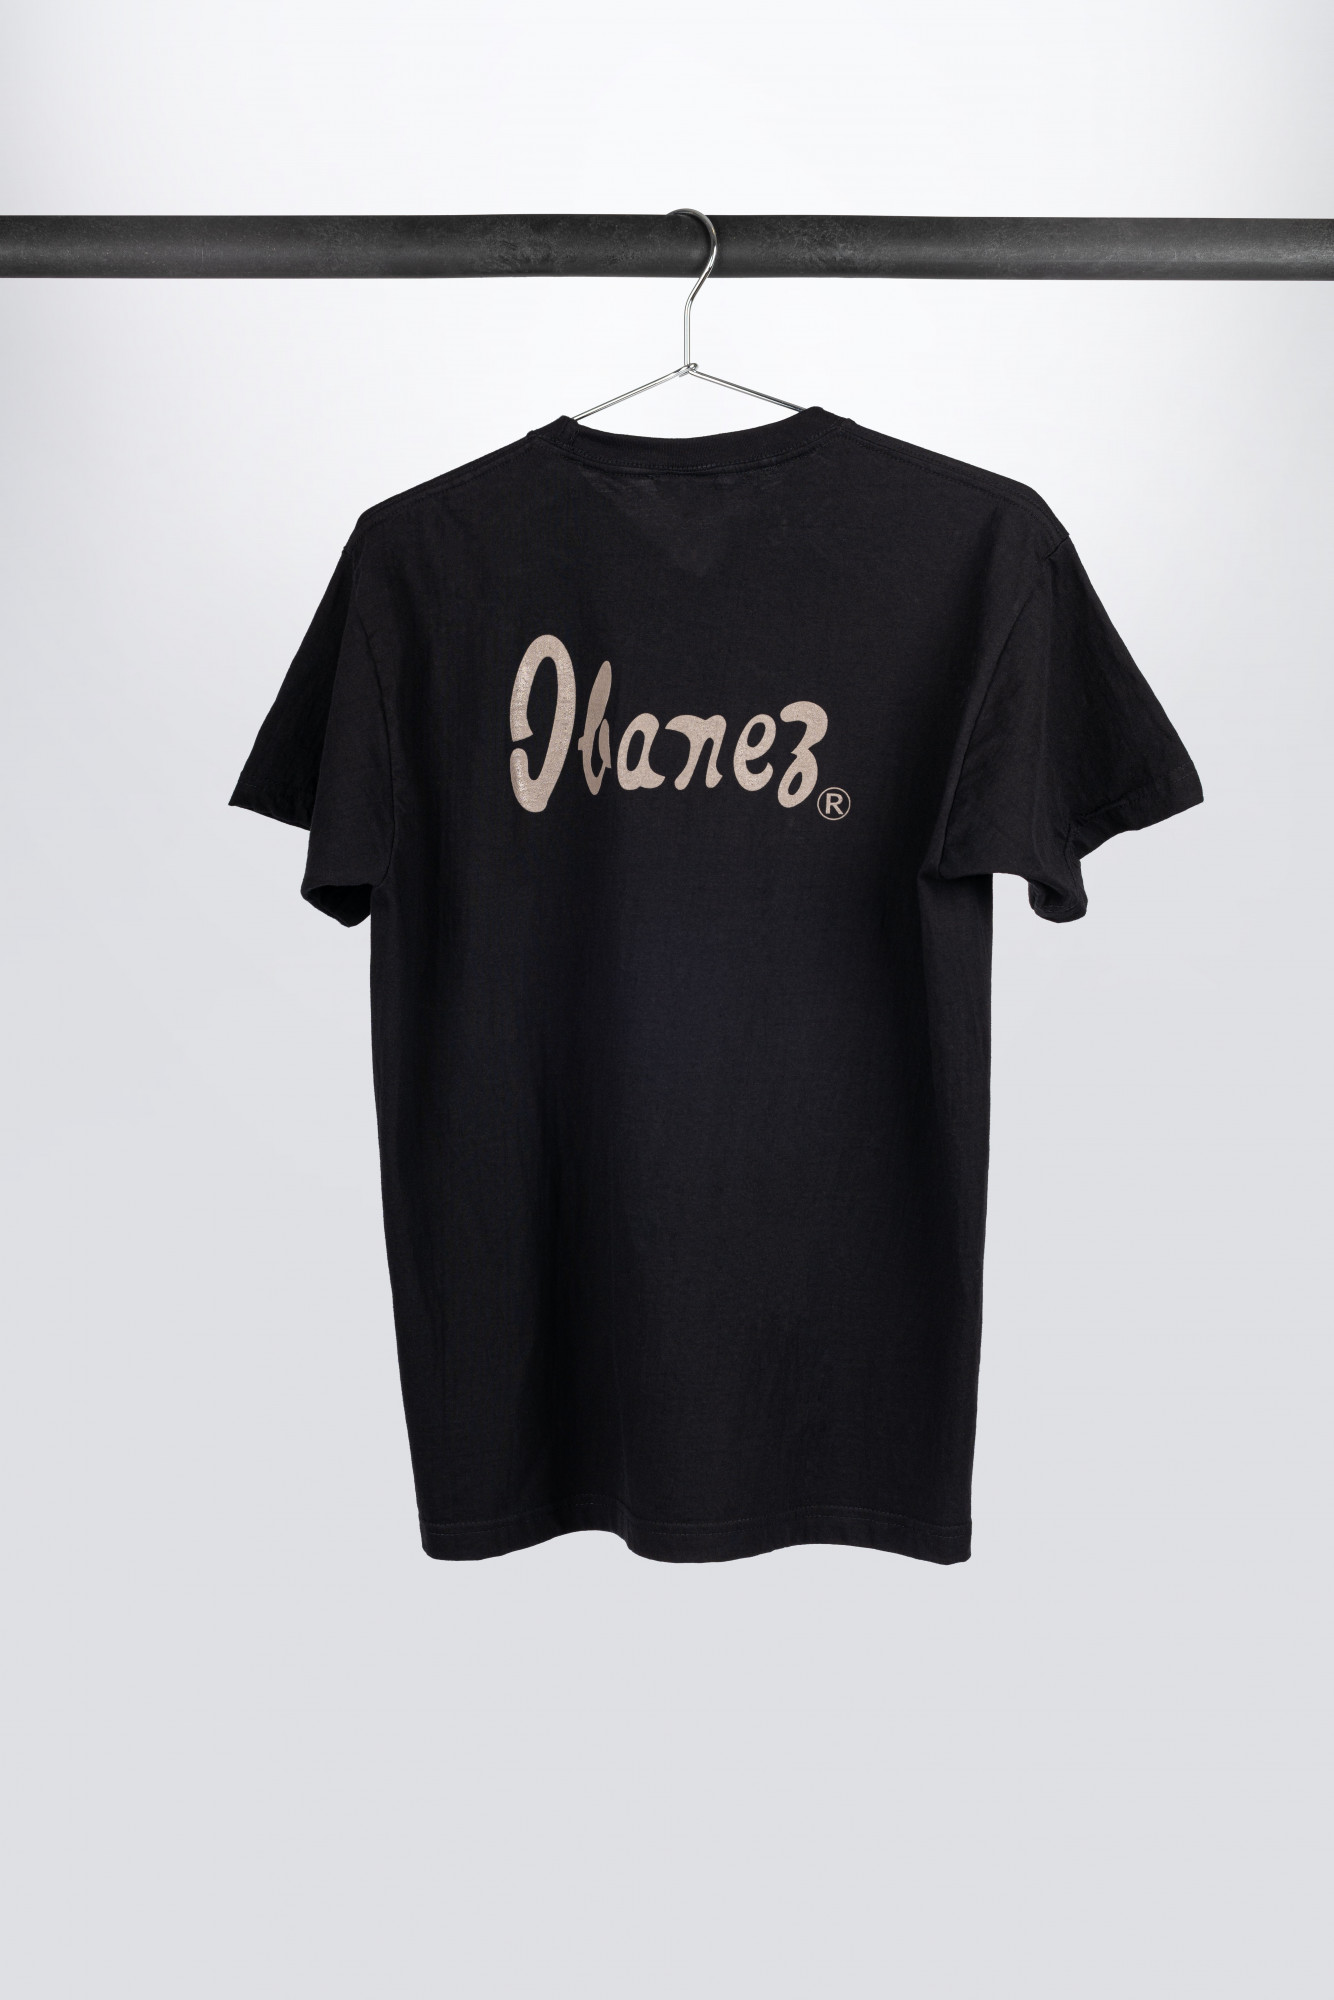 Black Ibanez t-shirt with grey 